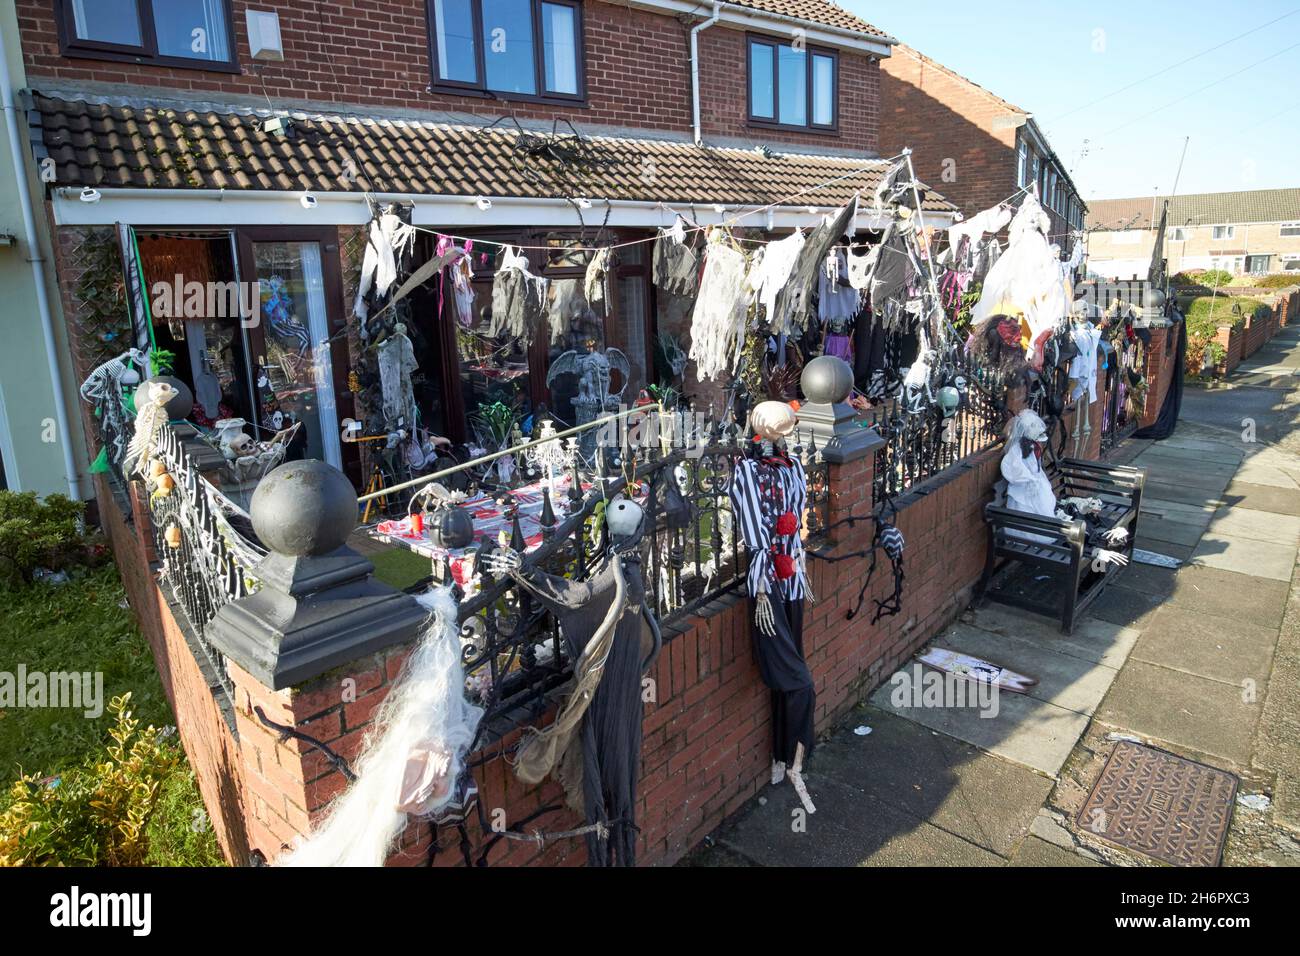 massive amount of halloween decorations outside a house in kirkby Liverpool merseyside uk Stock Photo